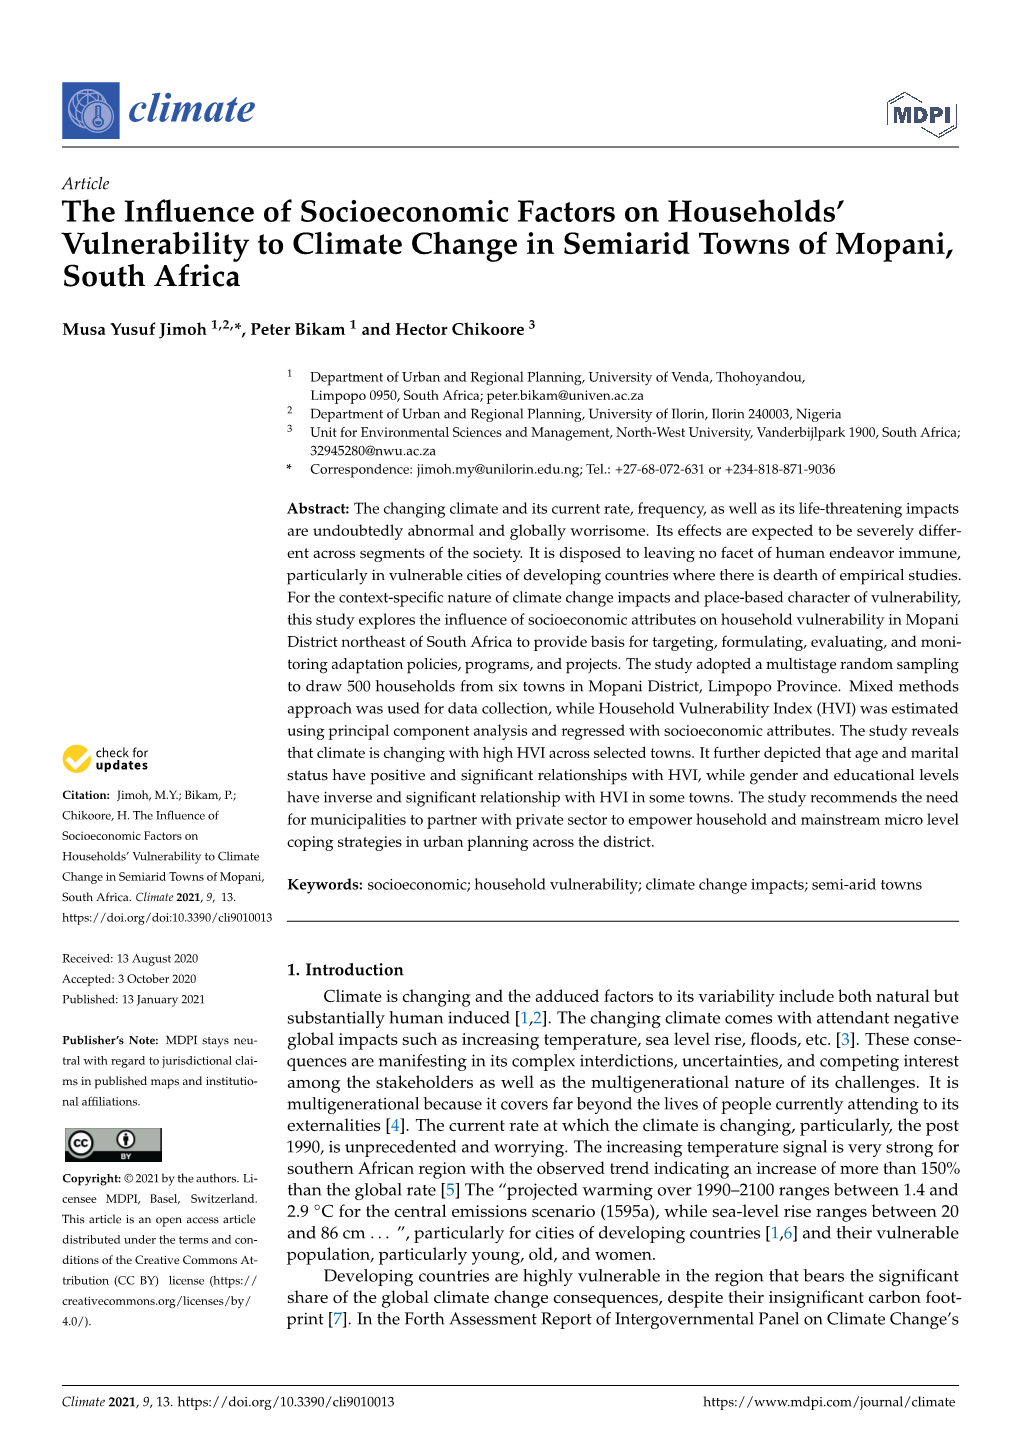 The Influence of Socioeconomic Factors on Households' Vulnerability to Climate Change in Semiarid Towns of Mopani, South Afric